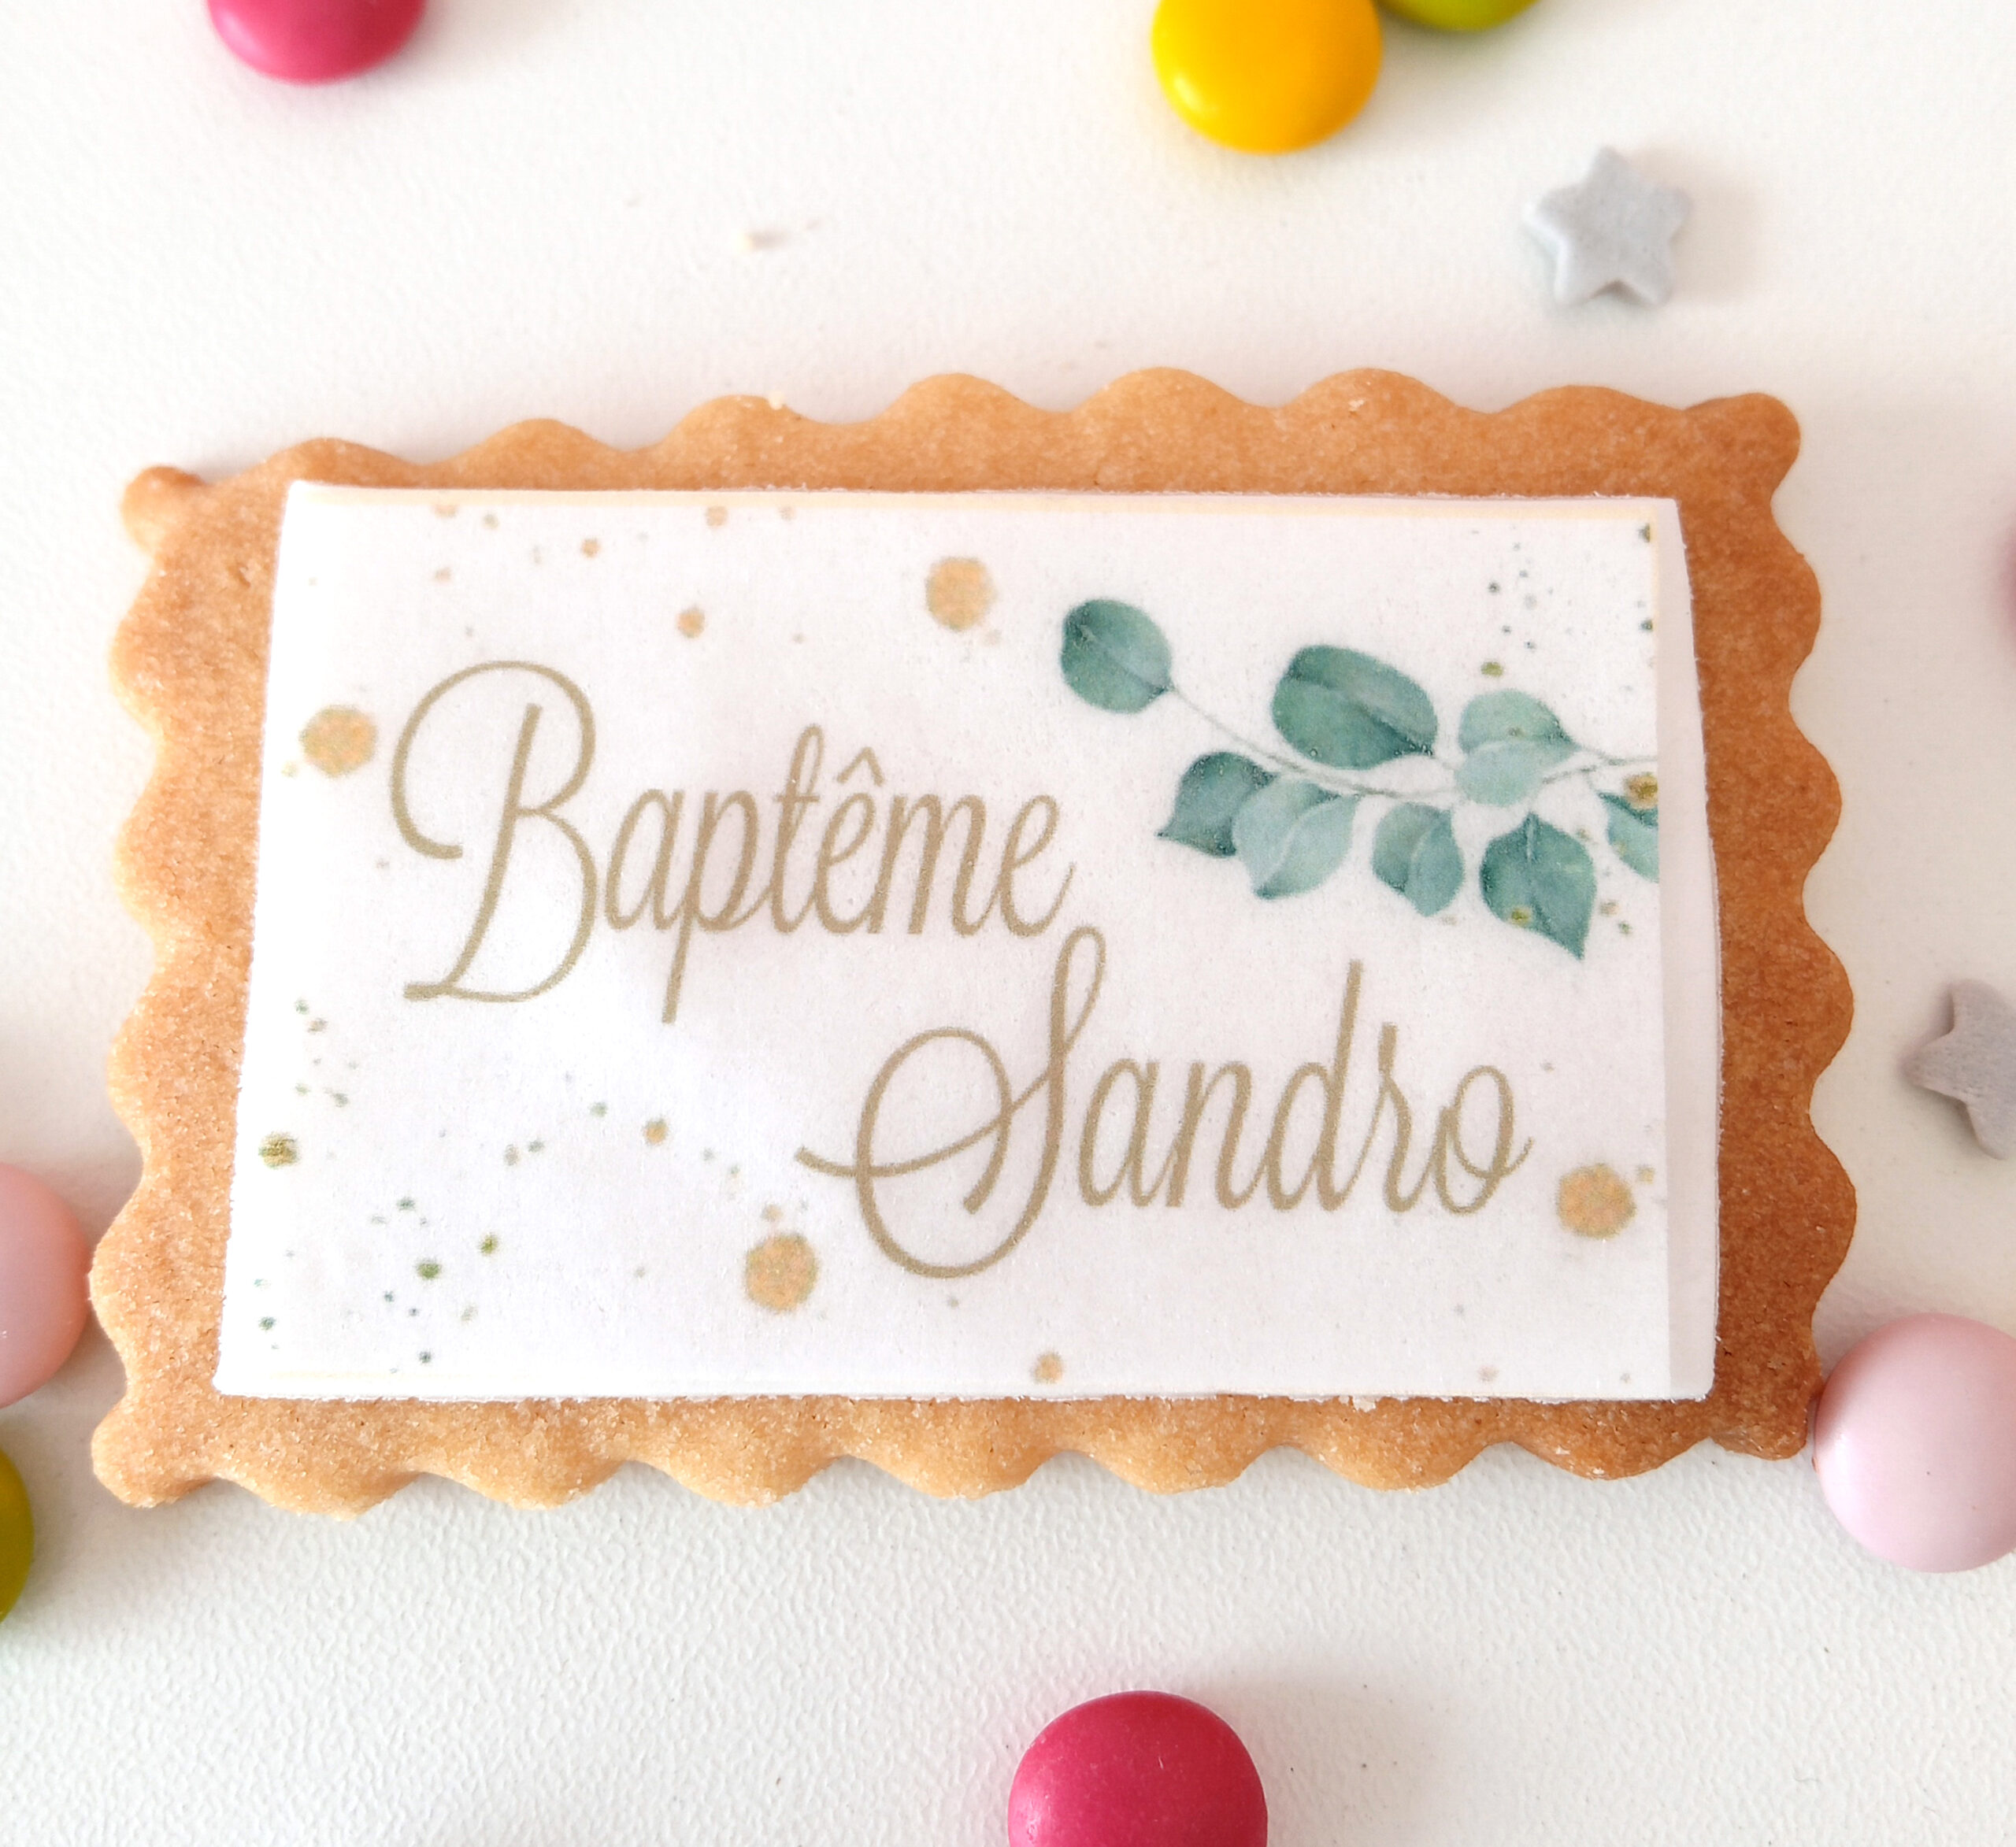 biscuit-personnalise-tradition-eucalyptus-bapteme